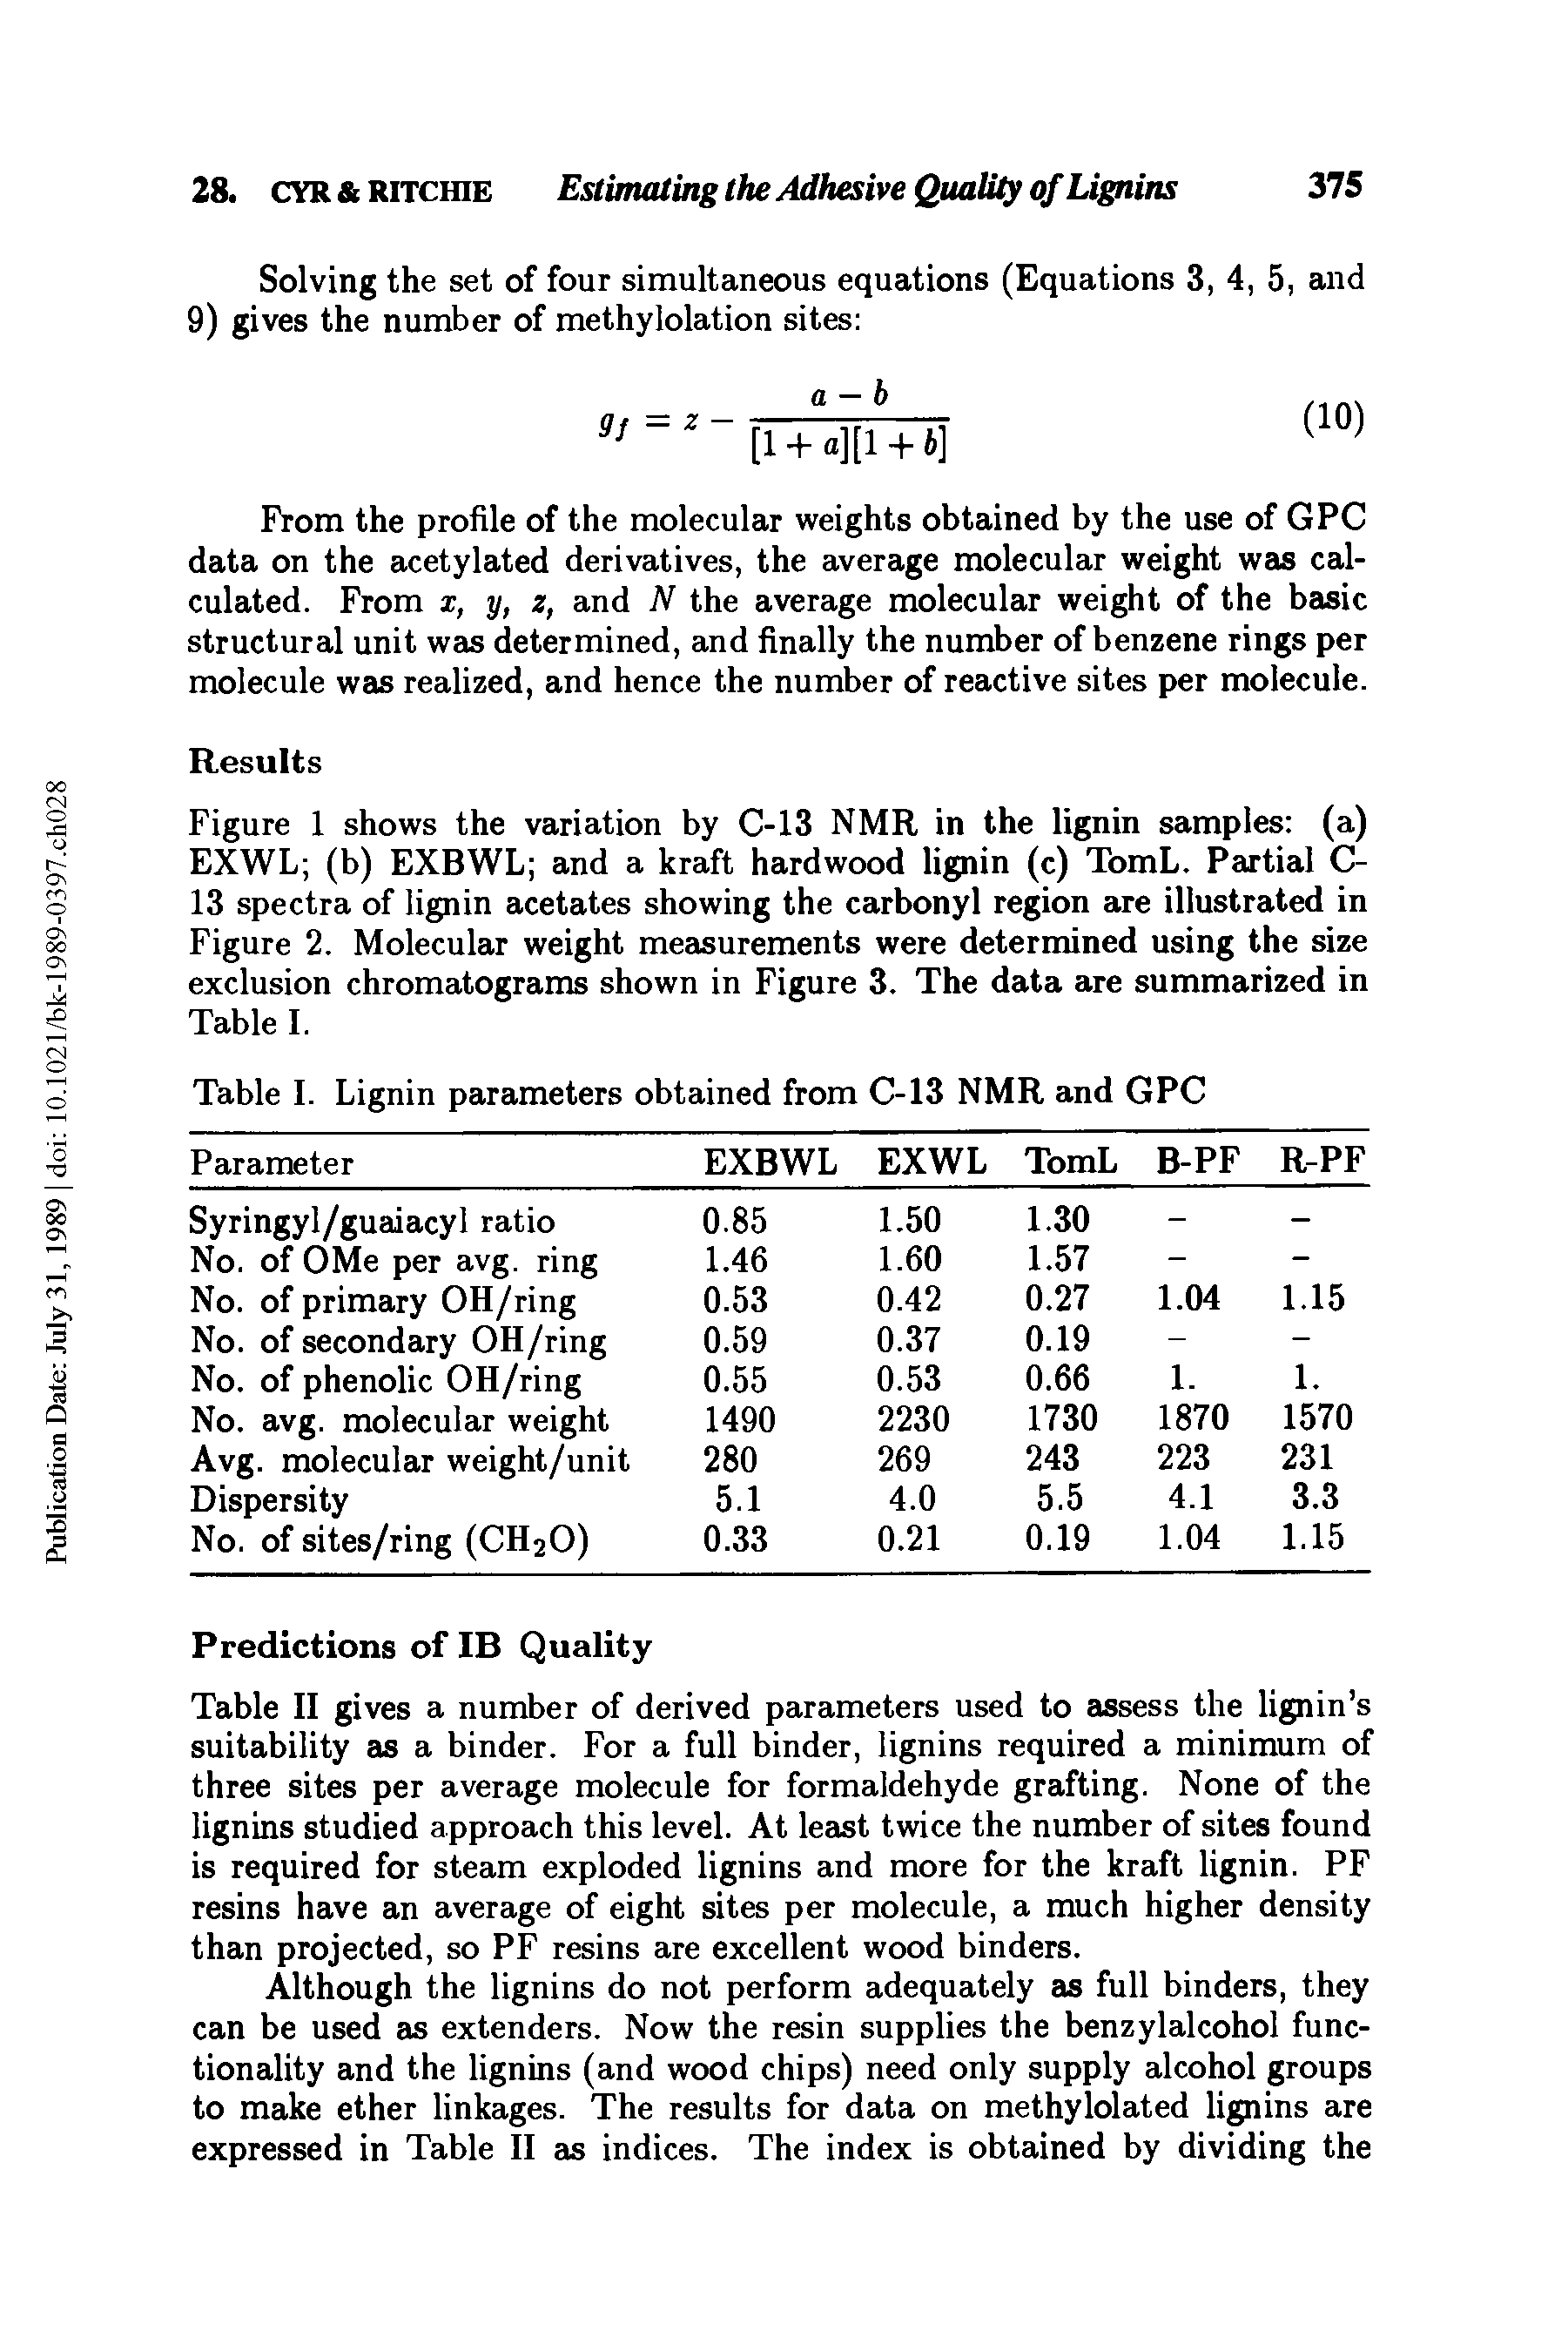 Table II gives a number of derived parameters used to assess the lignin s suitability as a binder. For a full binder, lignins required a minimum of three sites per average molecule for formaldehyde grafting. None of the lignins studied approach this level. At least twice the number of sites found is required for steam exploded lignins and more for the kraft lignin. PF resins have an average of eight sites per molecule, a much higher density than projected, so PF resins are excellent wood binders.